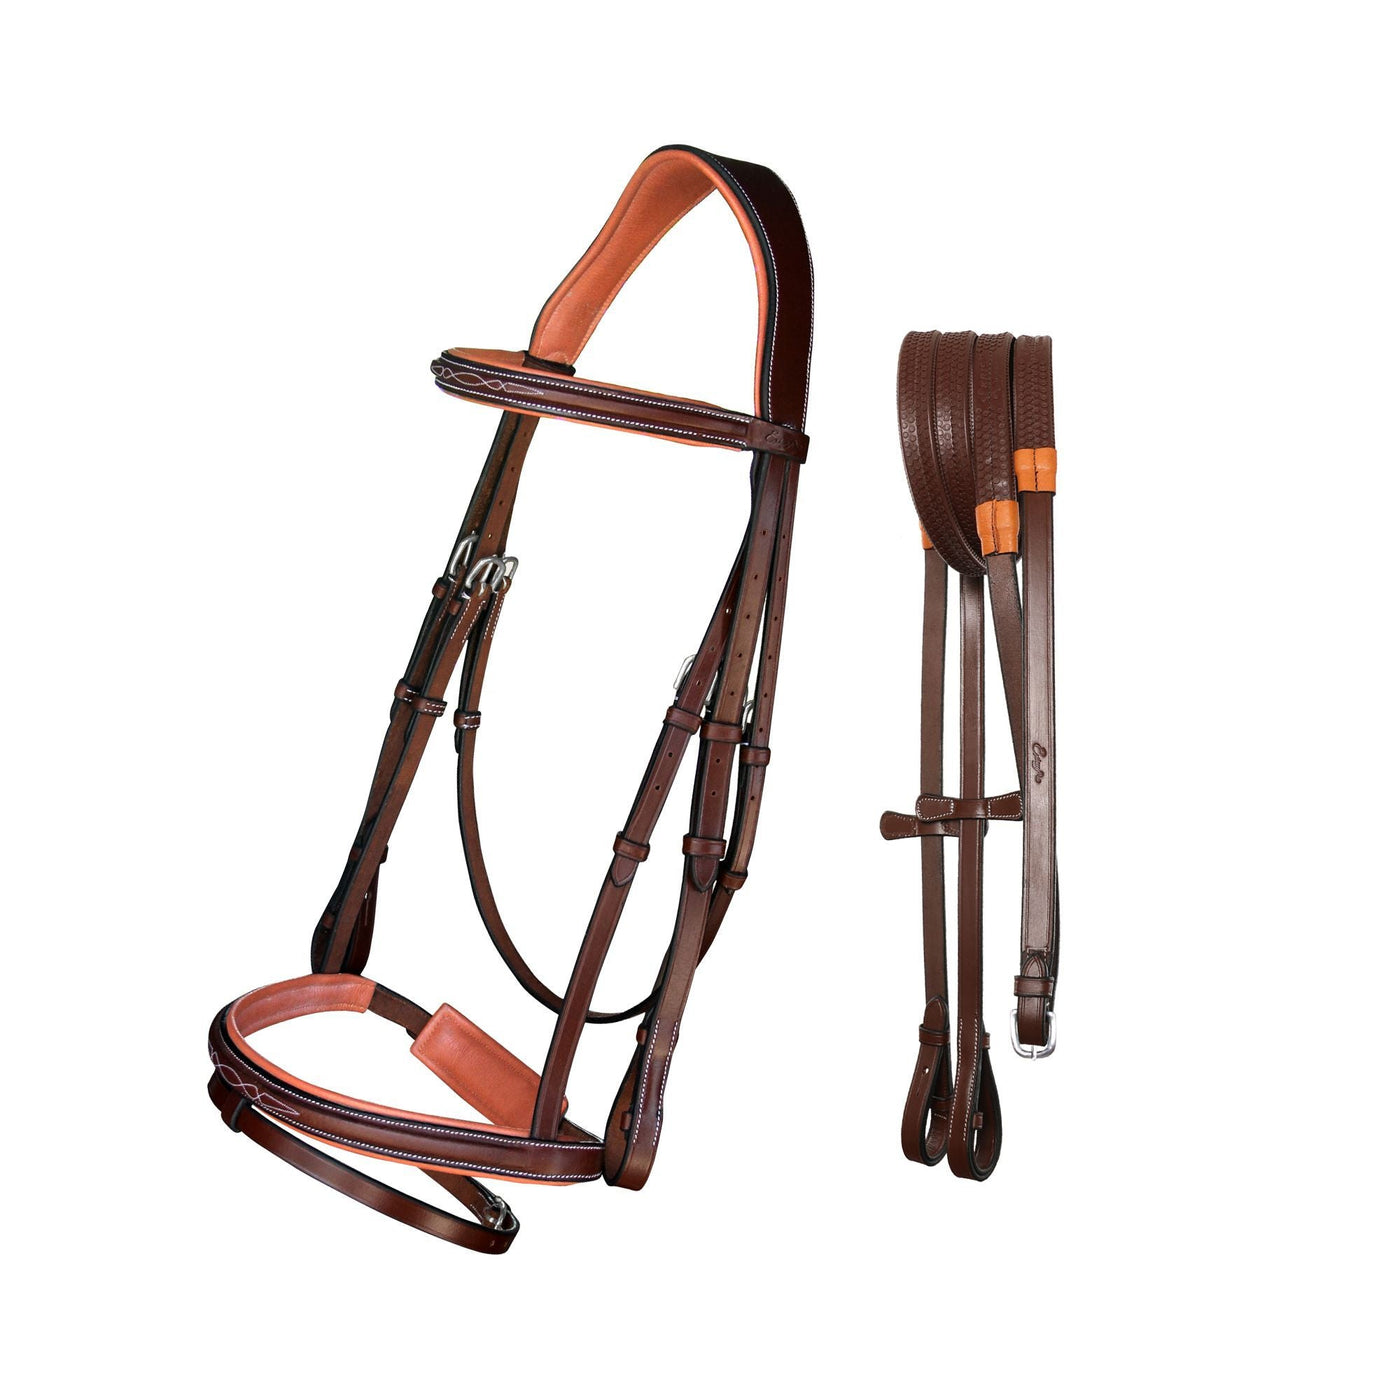 ExionPro Designer Fancy Stitched Bridle with Flash and Rubber Reins